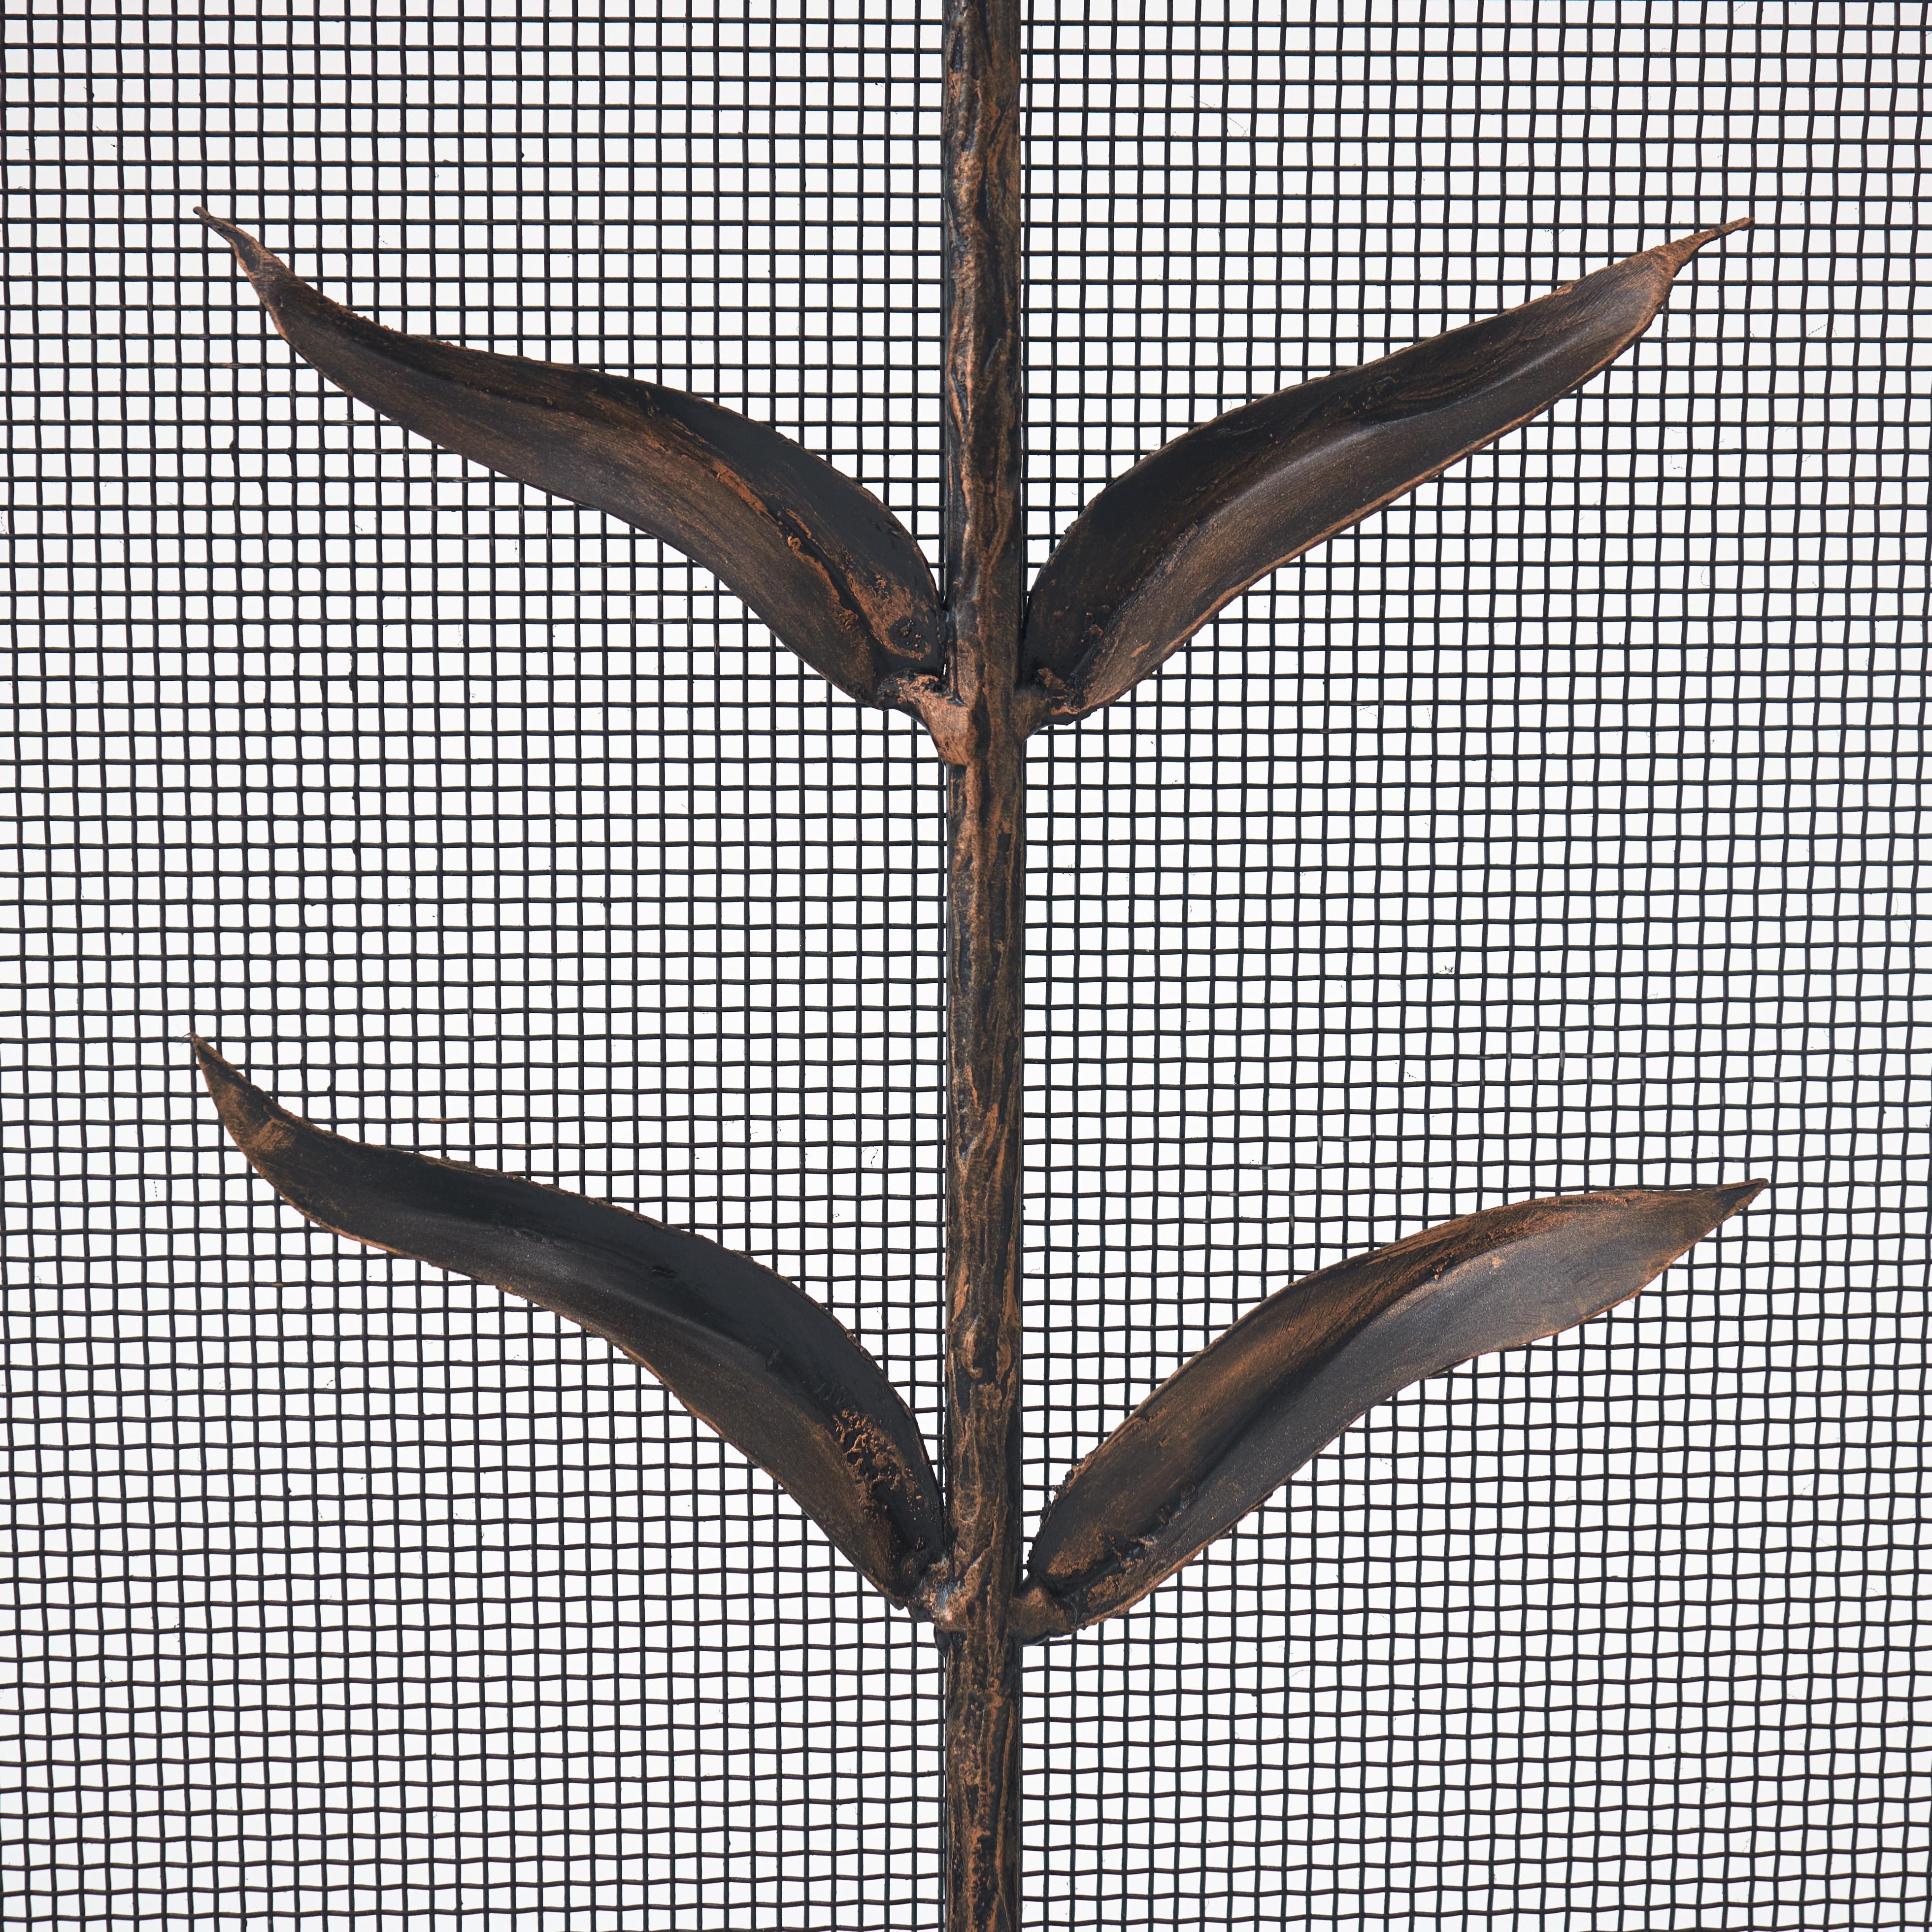 Elevating the art of the fireplace screens to new heights, the Lily Stems screen features uniquely formed leaves that seem to delicately emerge from the stems. Each leaf is formed and individually hand bent, ensuring no two are alike. The result is